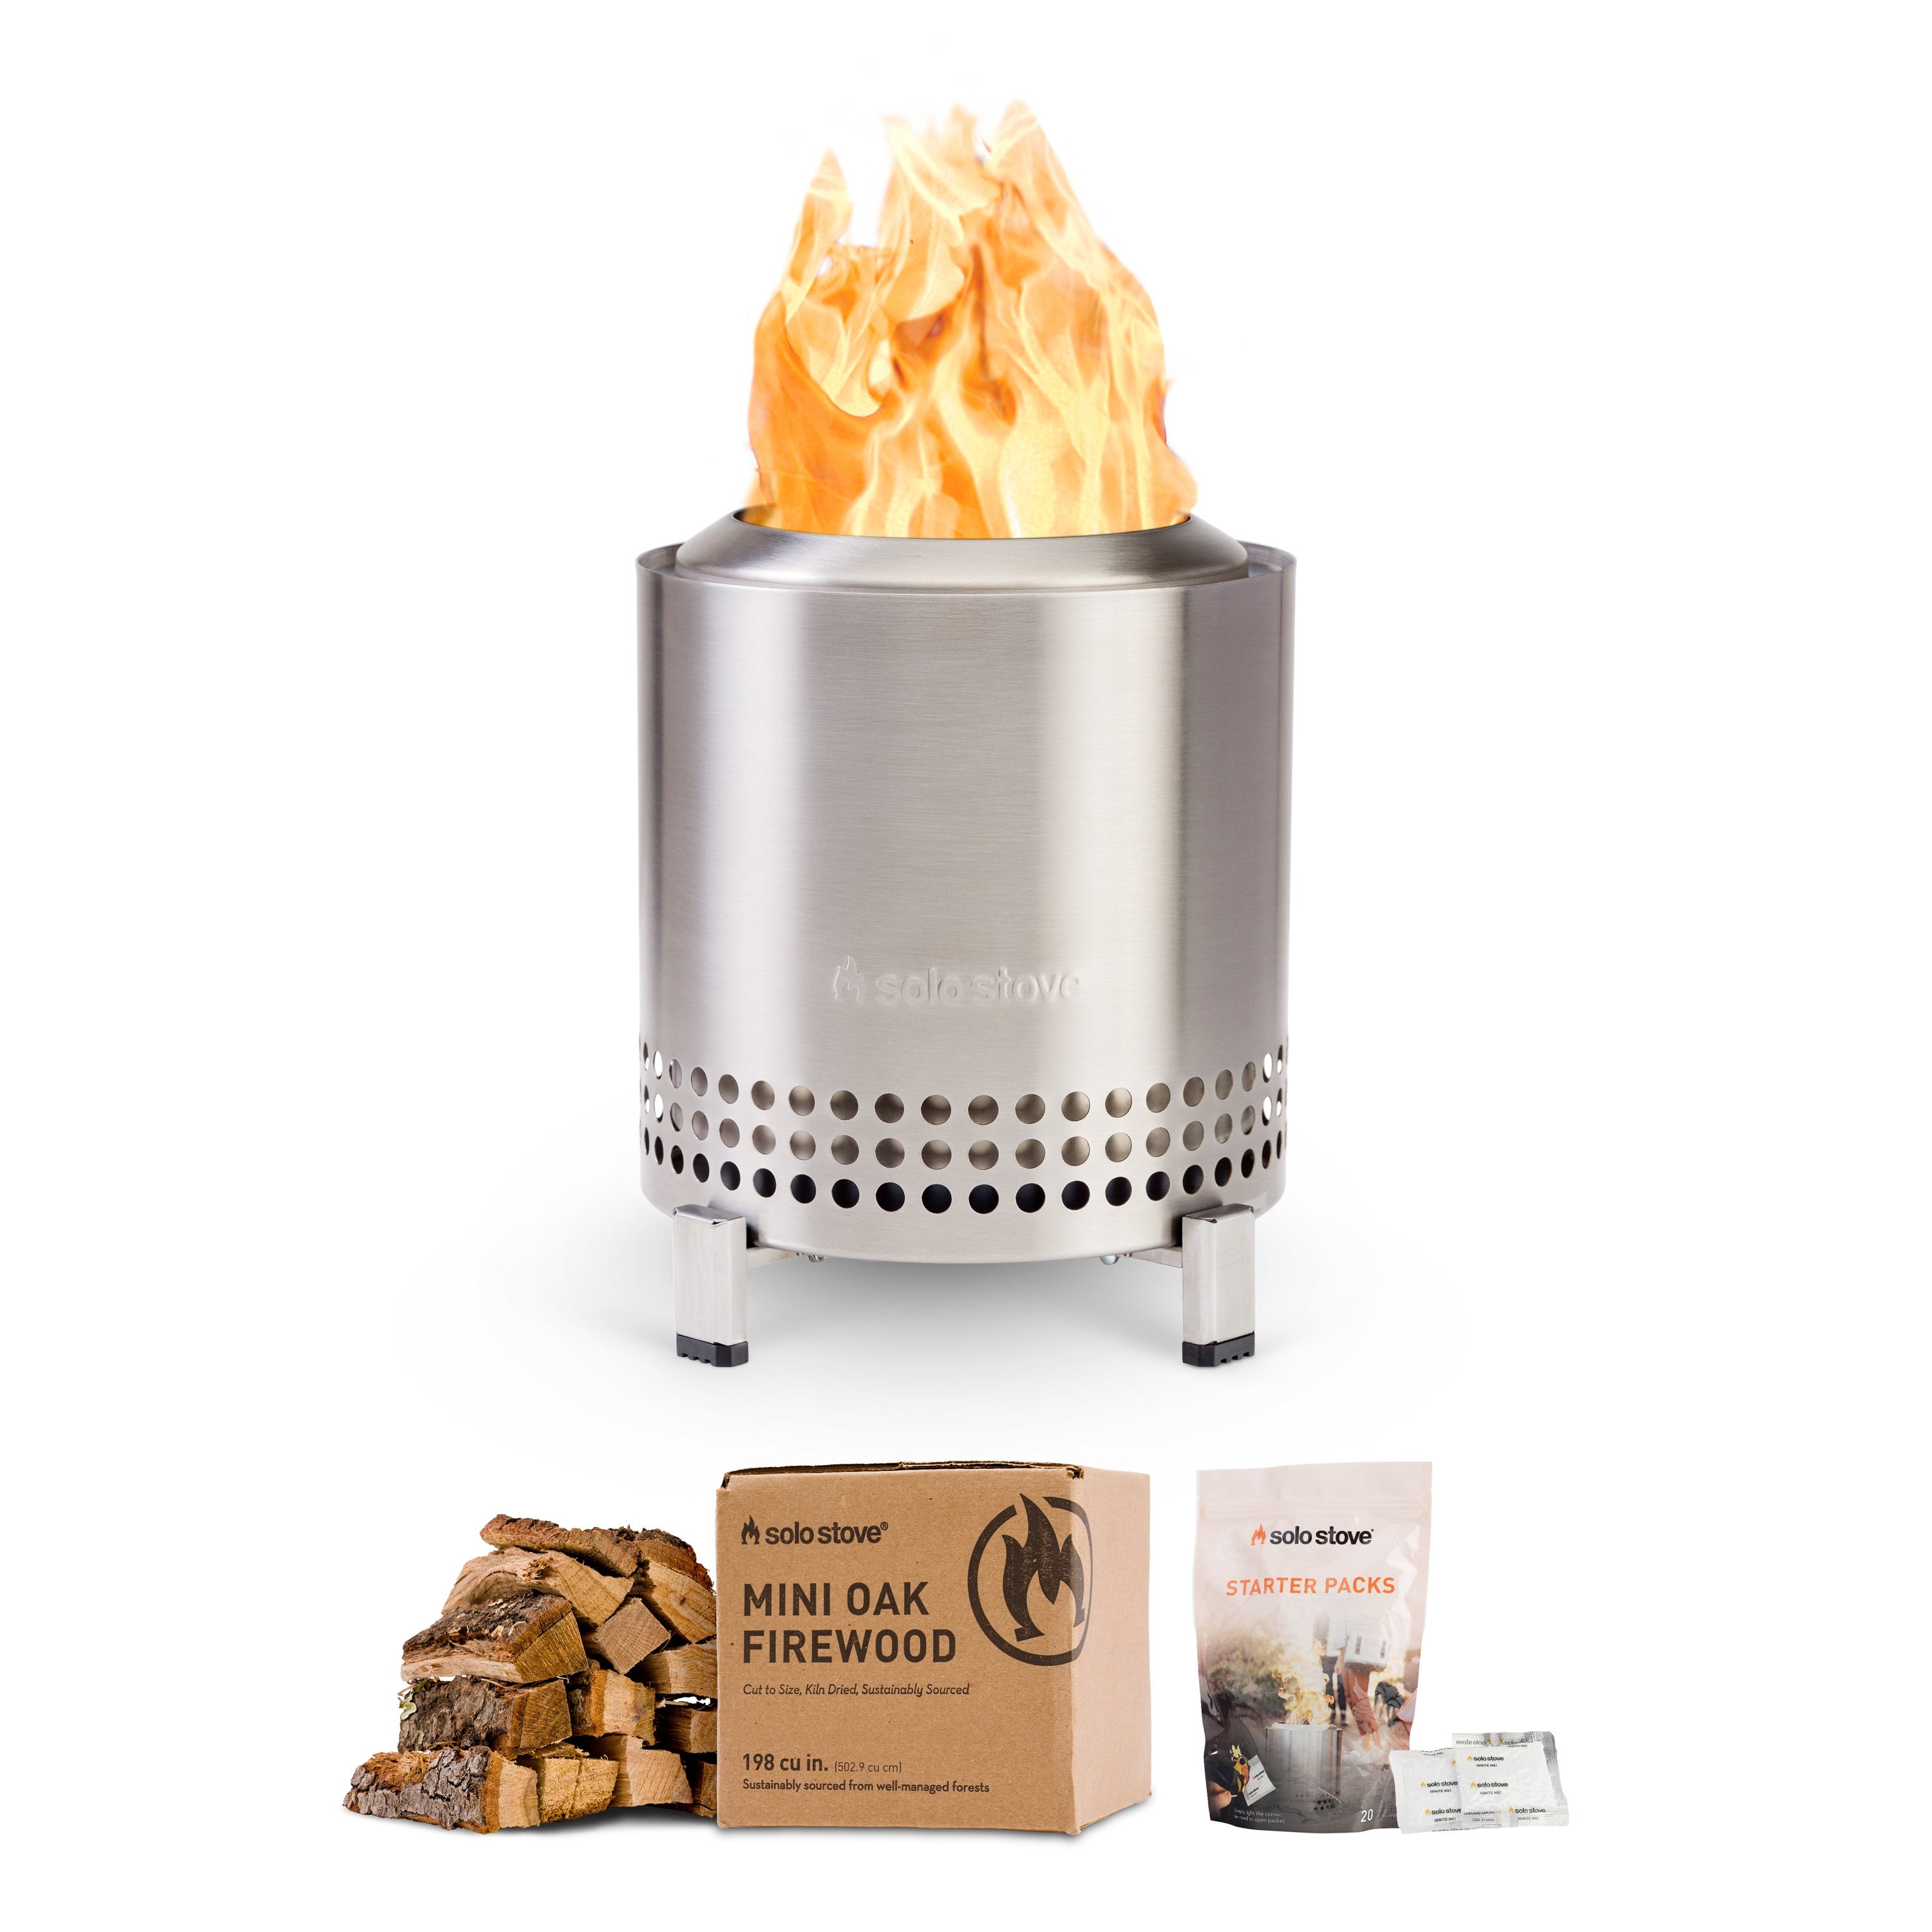 Mesa XL Tabletop Pit + Box of Mini Wood + Starter Pack Stainless